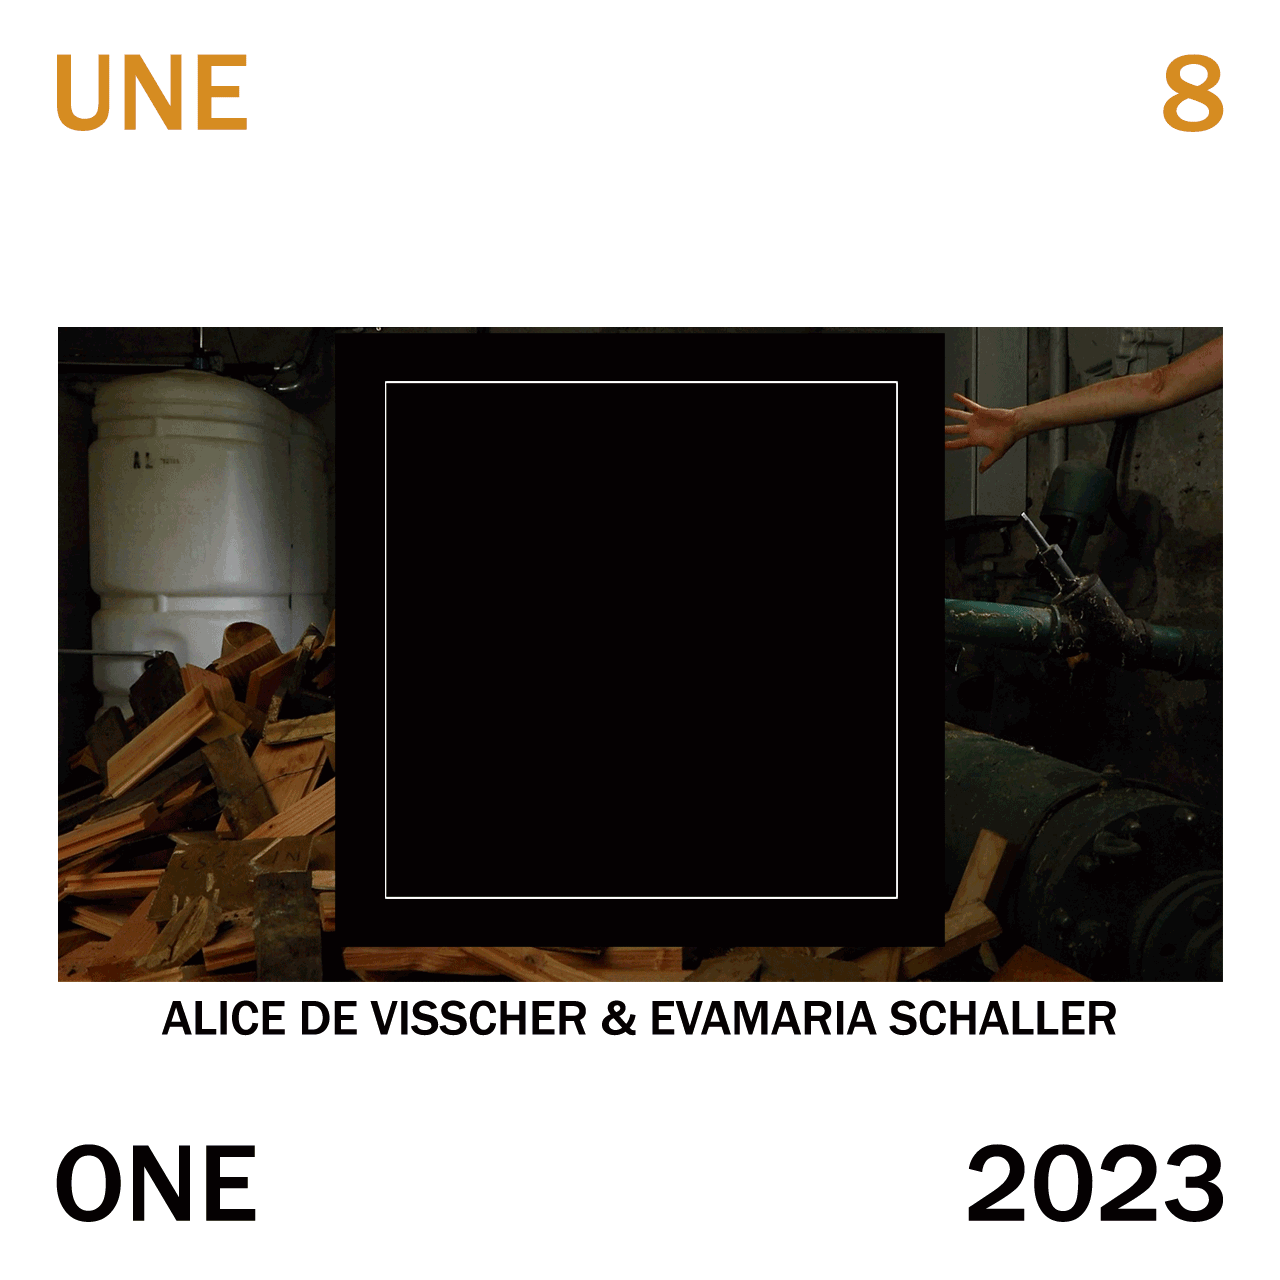 12YEARS_DIFFERENT-NOW_2023_ONE_H8_SCHALLER_AUG20